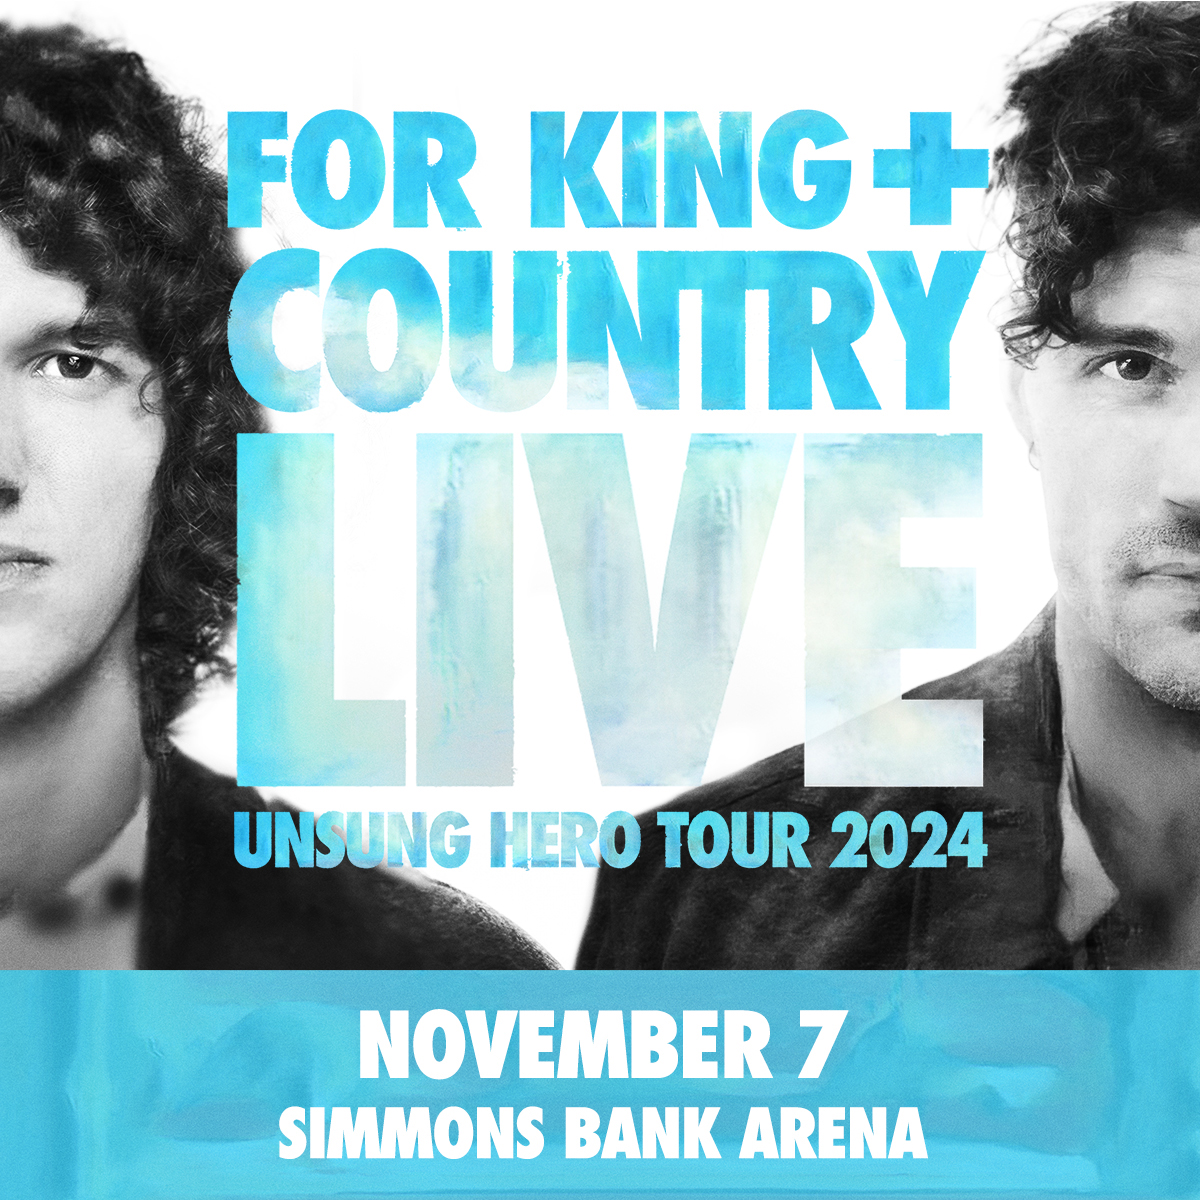 ⚠️ INTERNET ONLY PRESALE ⚠️ Don’t miss out on your chance to get tickets to see for KING + COUNTRY before they go on sale to the general public! 📆 Starts tomorrow, Tuesday, May 7 at 10AM & ends on Thursday, May 9 at 11:59PM 🗝️ Code: COUNTRY 🎟️ bit.ly/44tIRVt